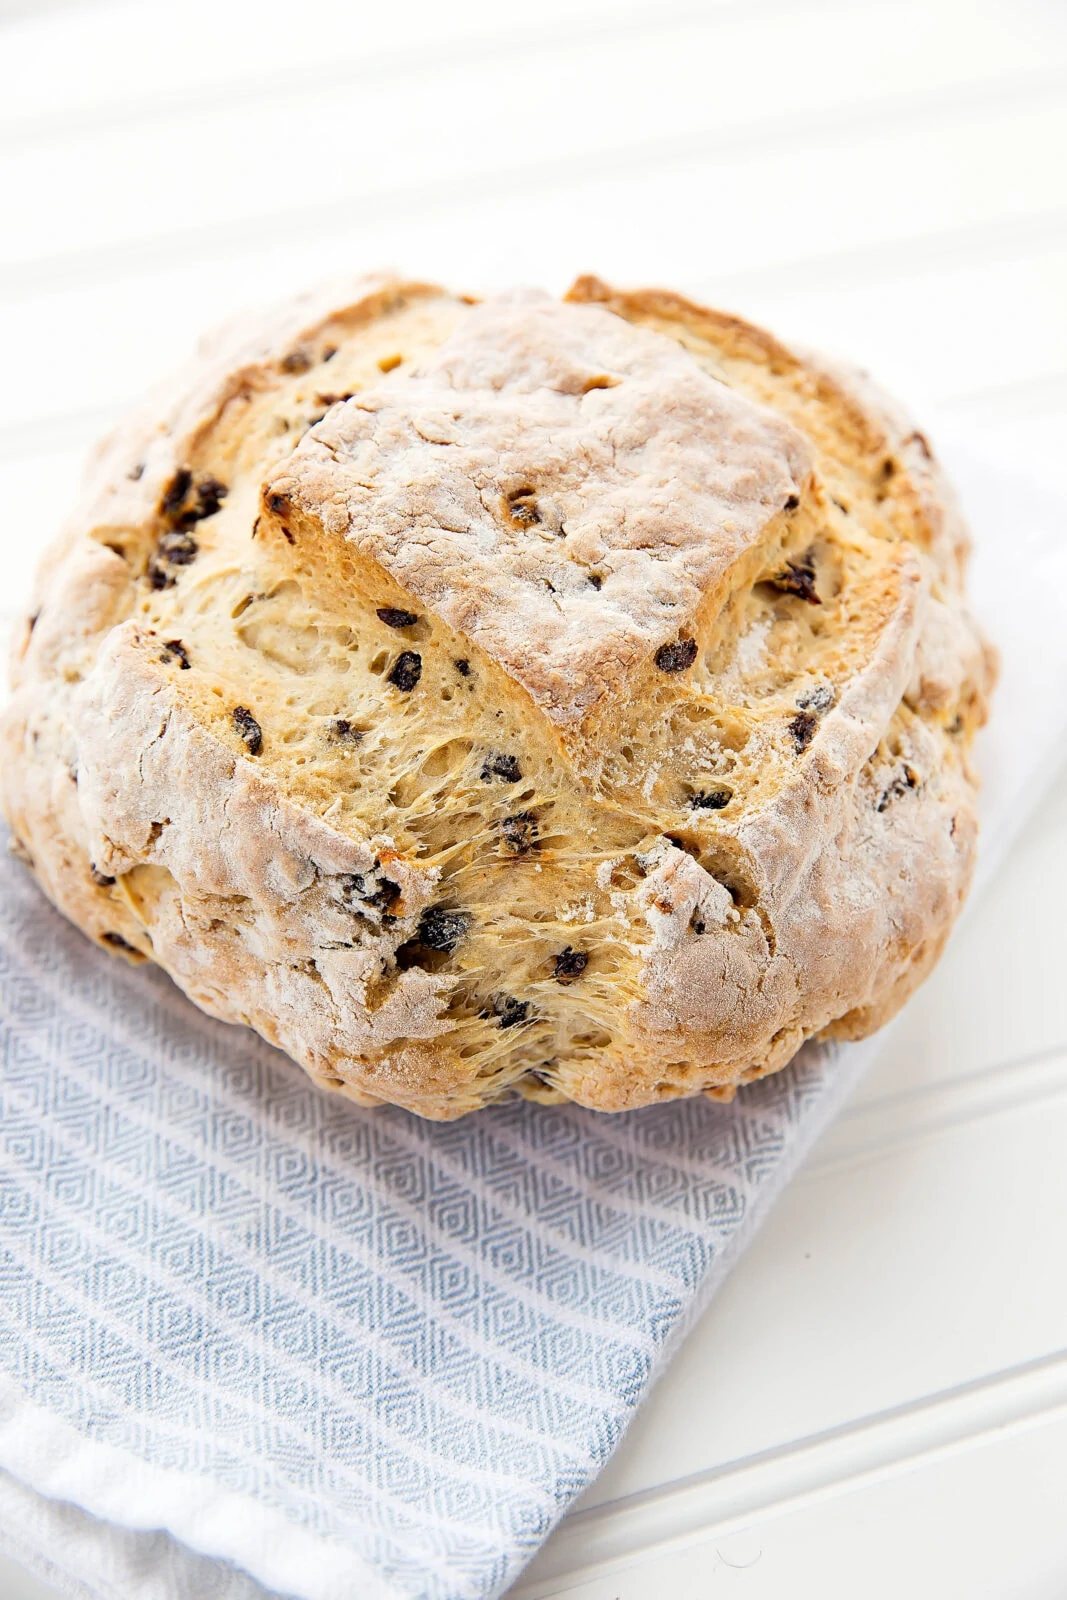 Homemade Irish Soda Bread in one hour? It's almost too good to be true! Celebrate St. Patrick's day with this quick, easy, and delicious loaf